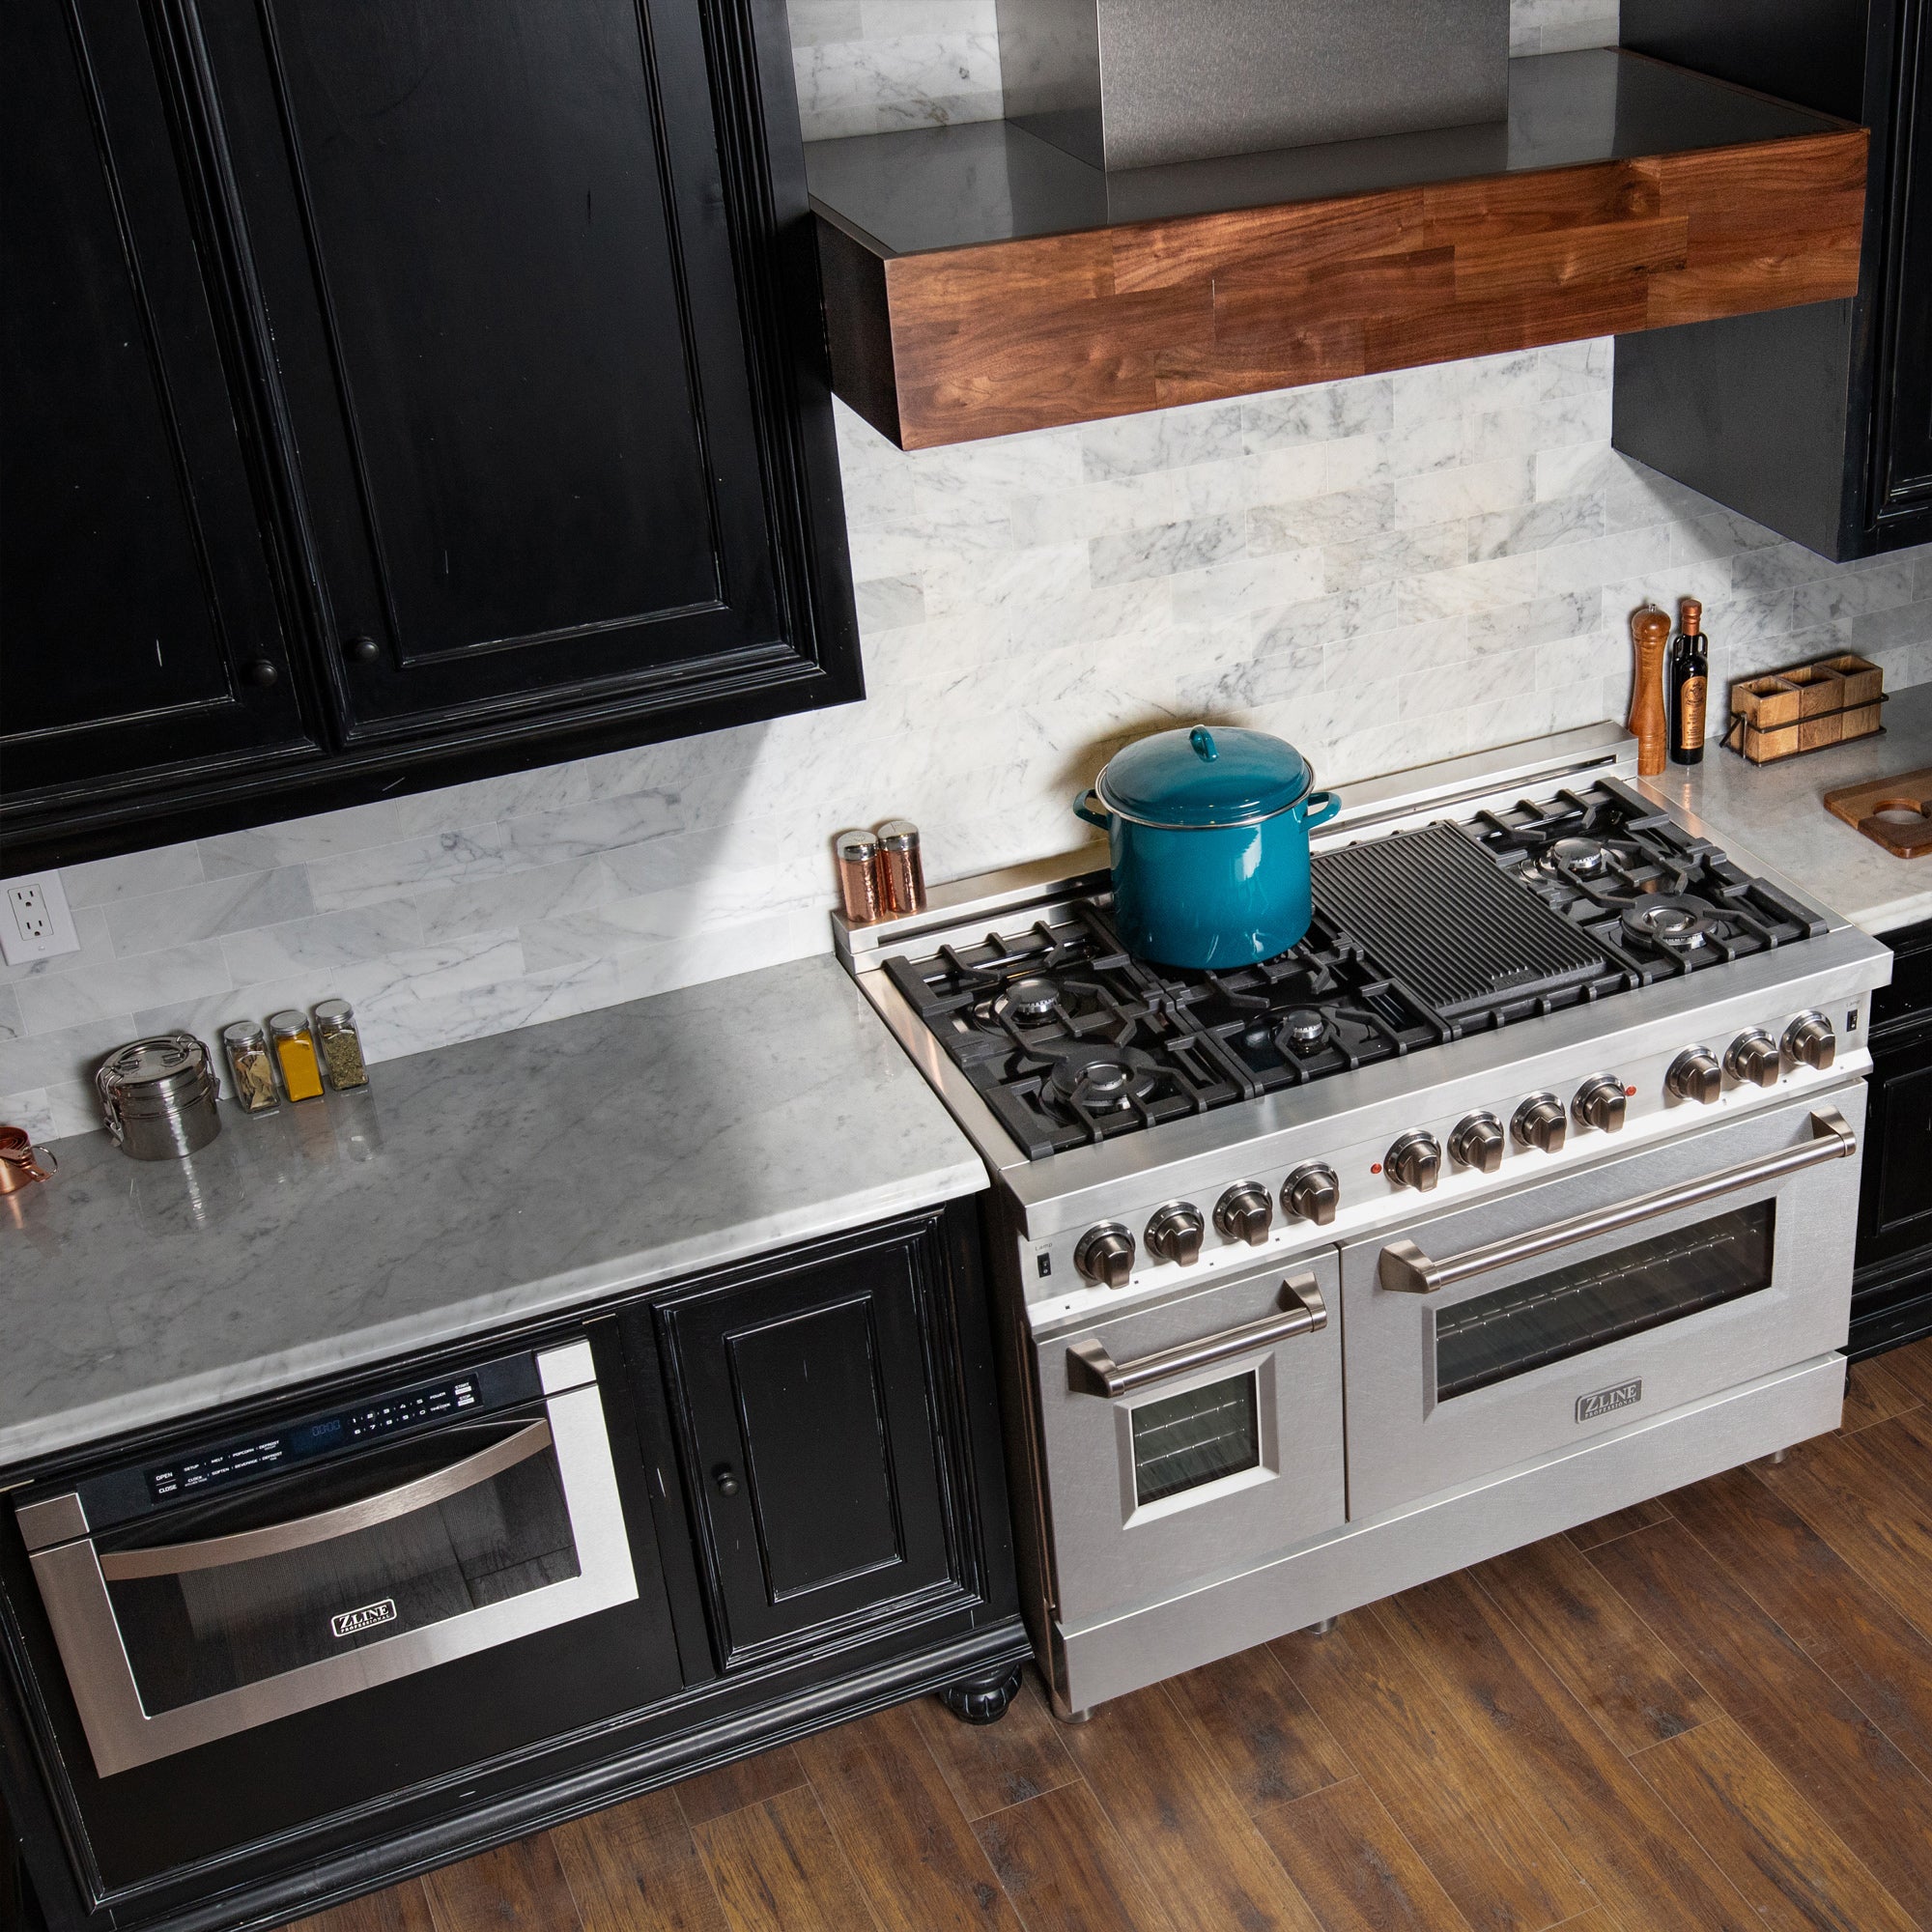 ZLINE 48 in. Professional Dual Fuel Range in Stainless Steel with Color Door Options (RA48) - New Star Living